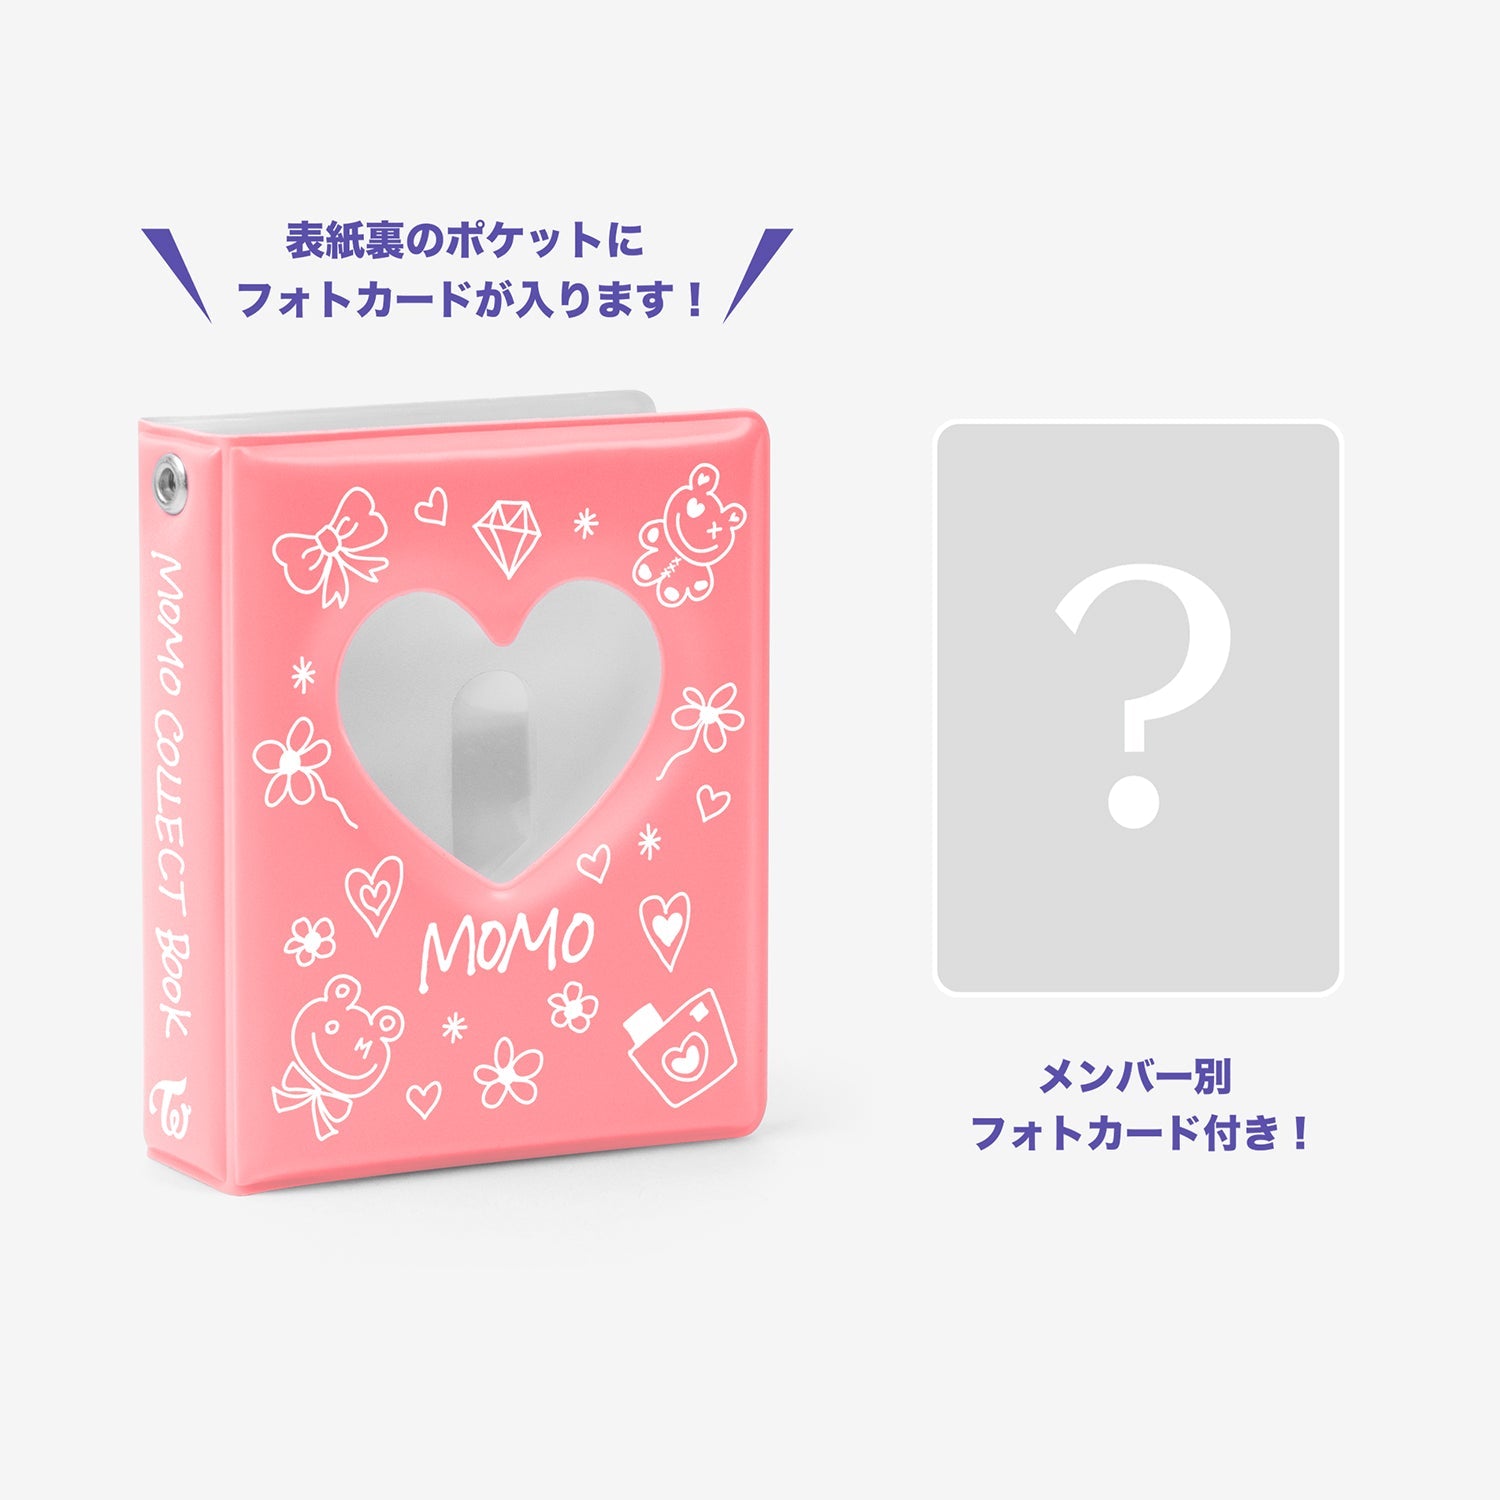 COLLECT BOOK Designed by MOMO / TWICE『JAPAN DEBUT 7th Anniversary』